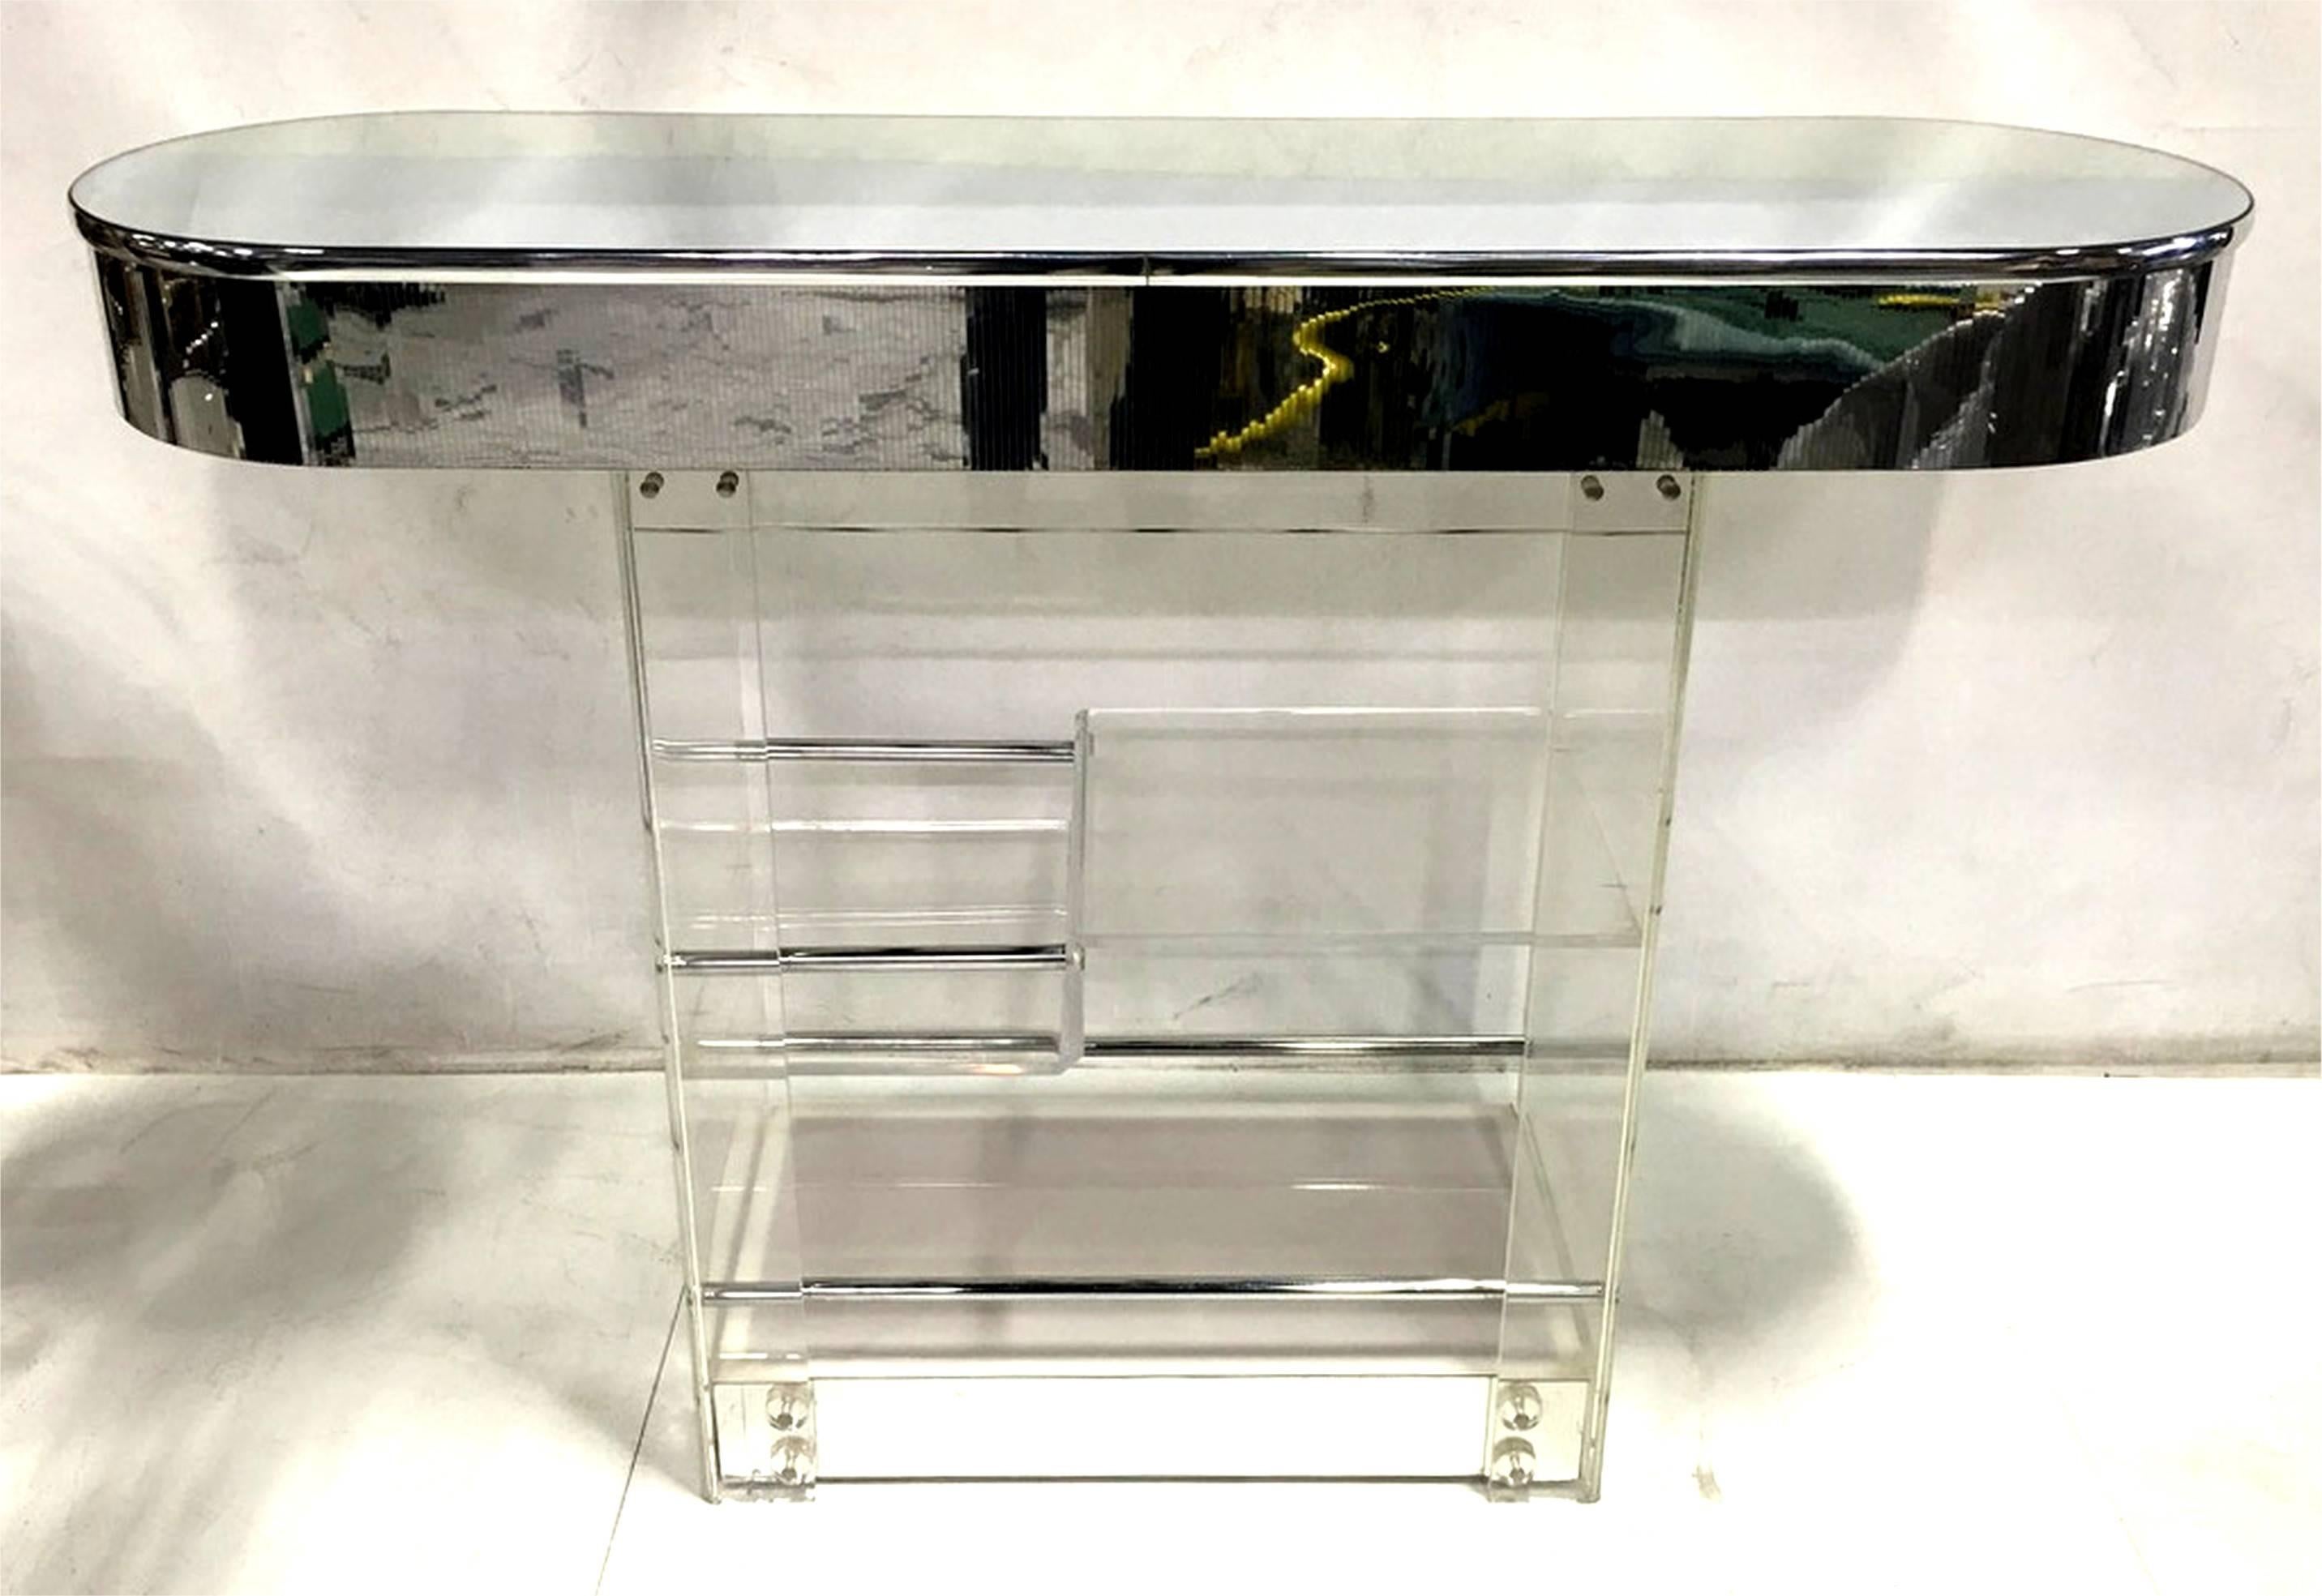 Beautiful vintage Lucite bar with mirror trim and chrome mounts by Hill Mfg. Hill made the best of the best Lucite furniture and fixtures, heads above any other shop, and their designs have become iconic and collectible. The bar is in excellent